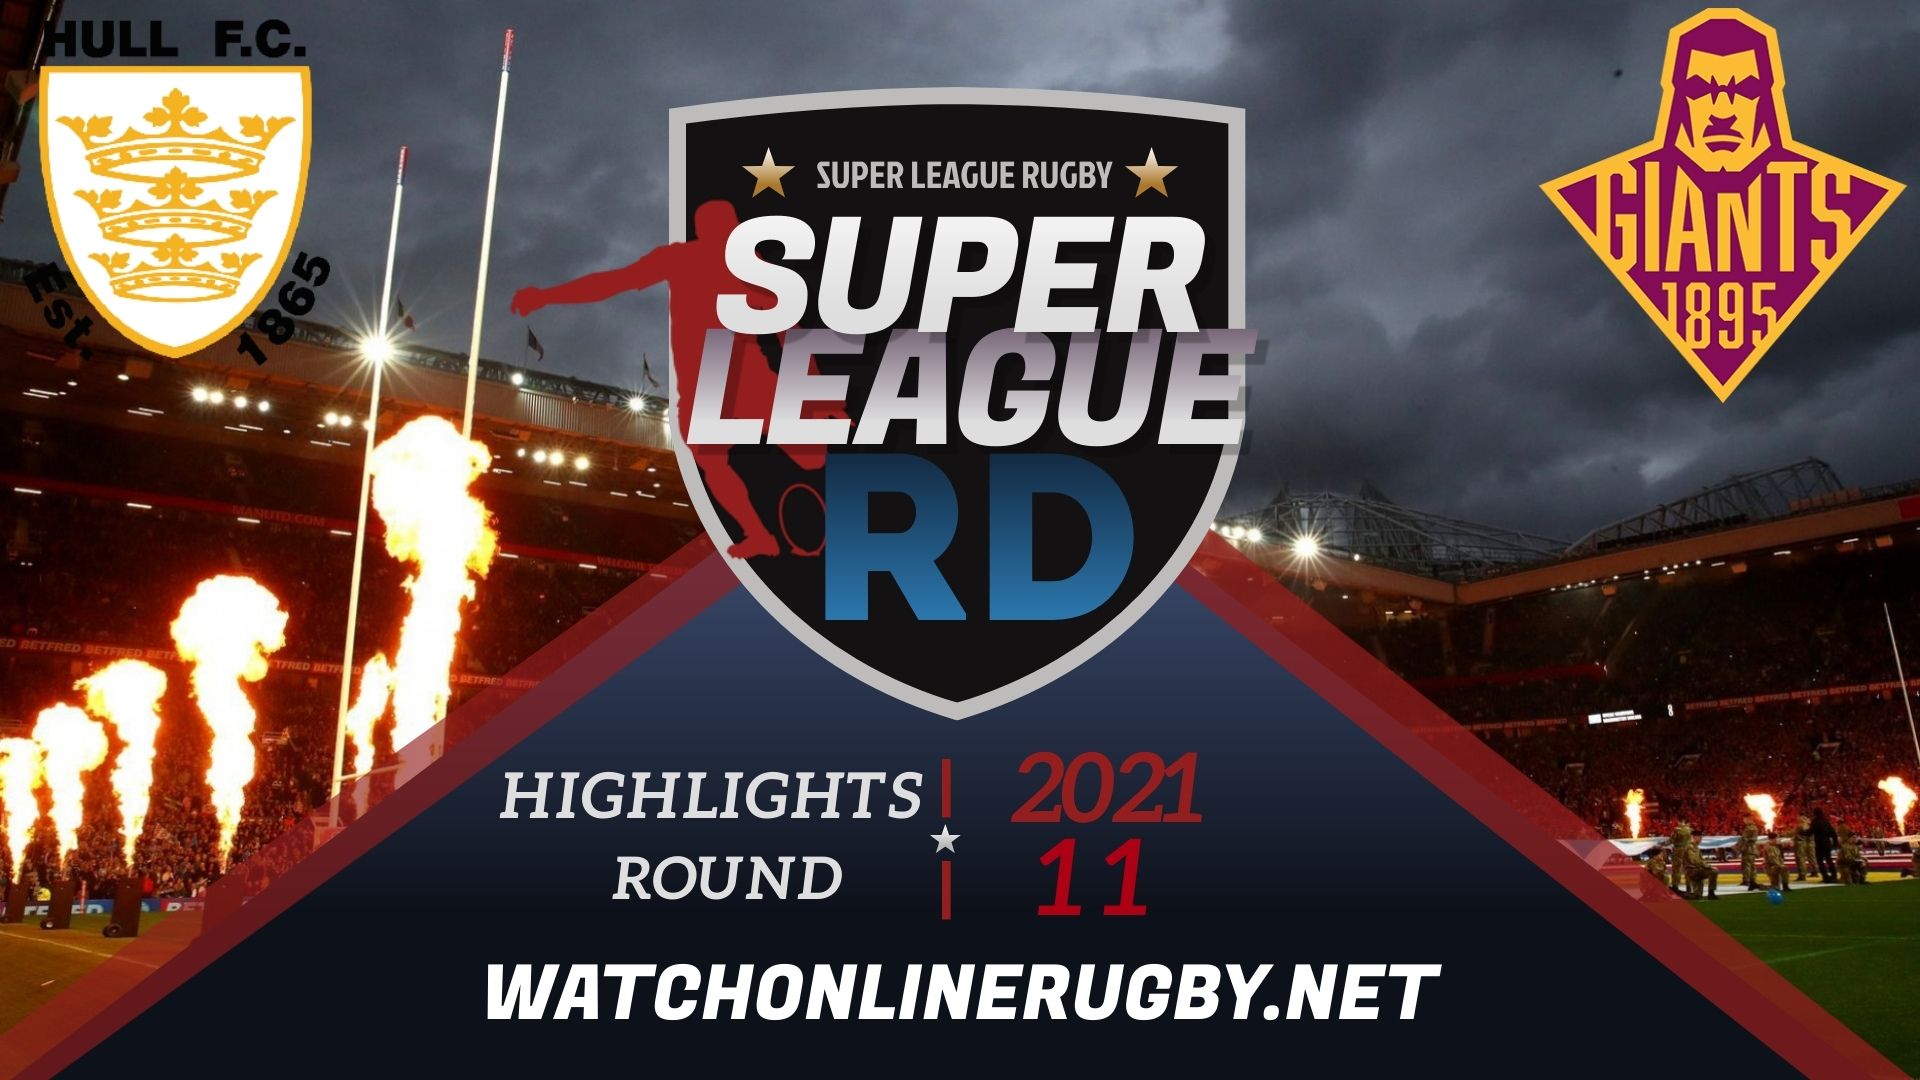 Hull FC Vs Huddersfield Giants Super League Rugby 2021 RD 11